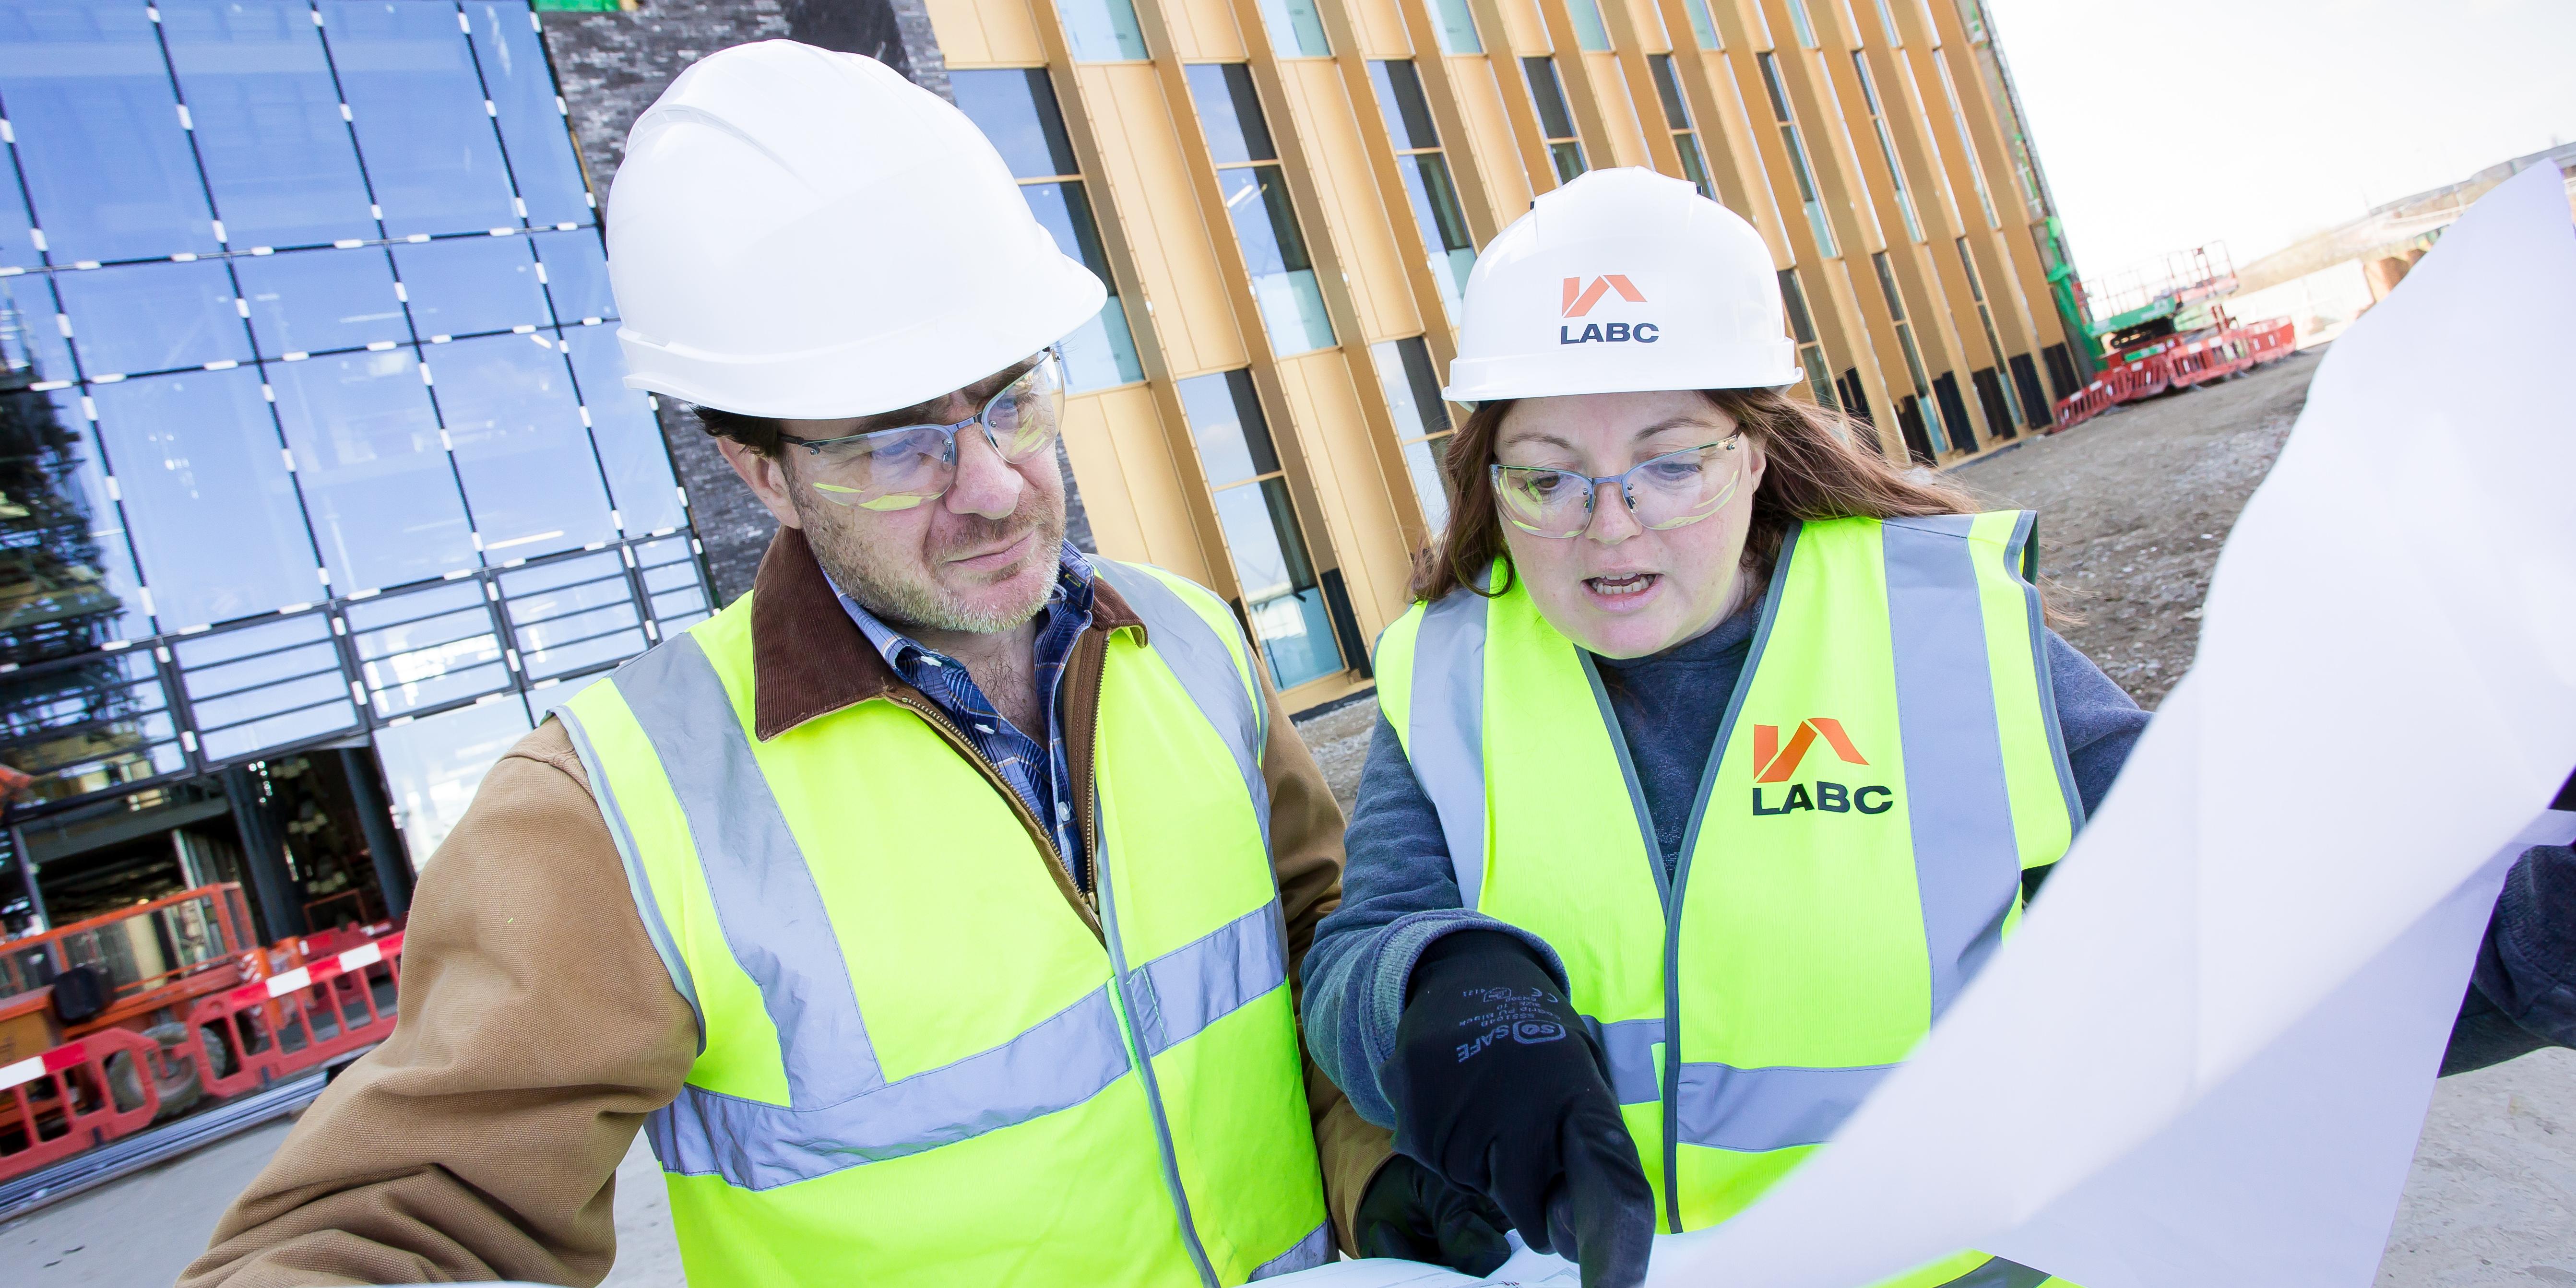 LABC building control officer on site